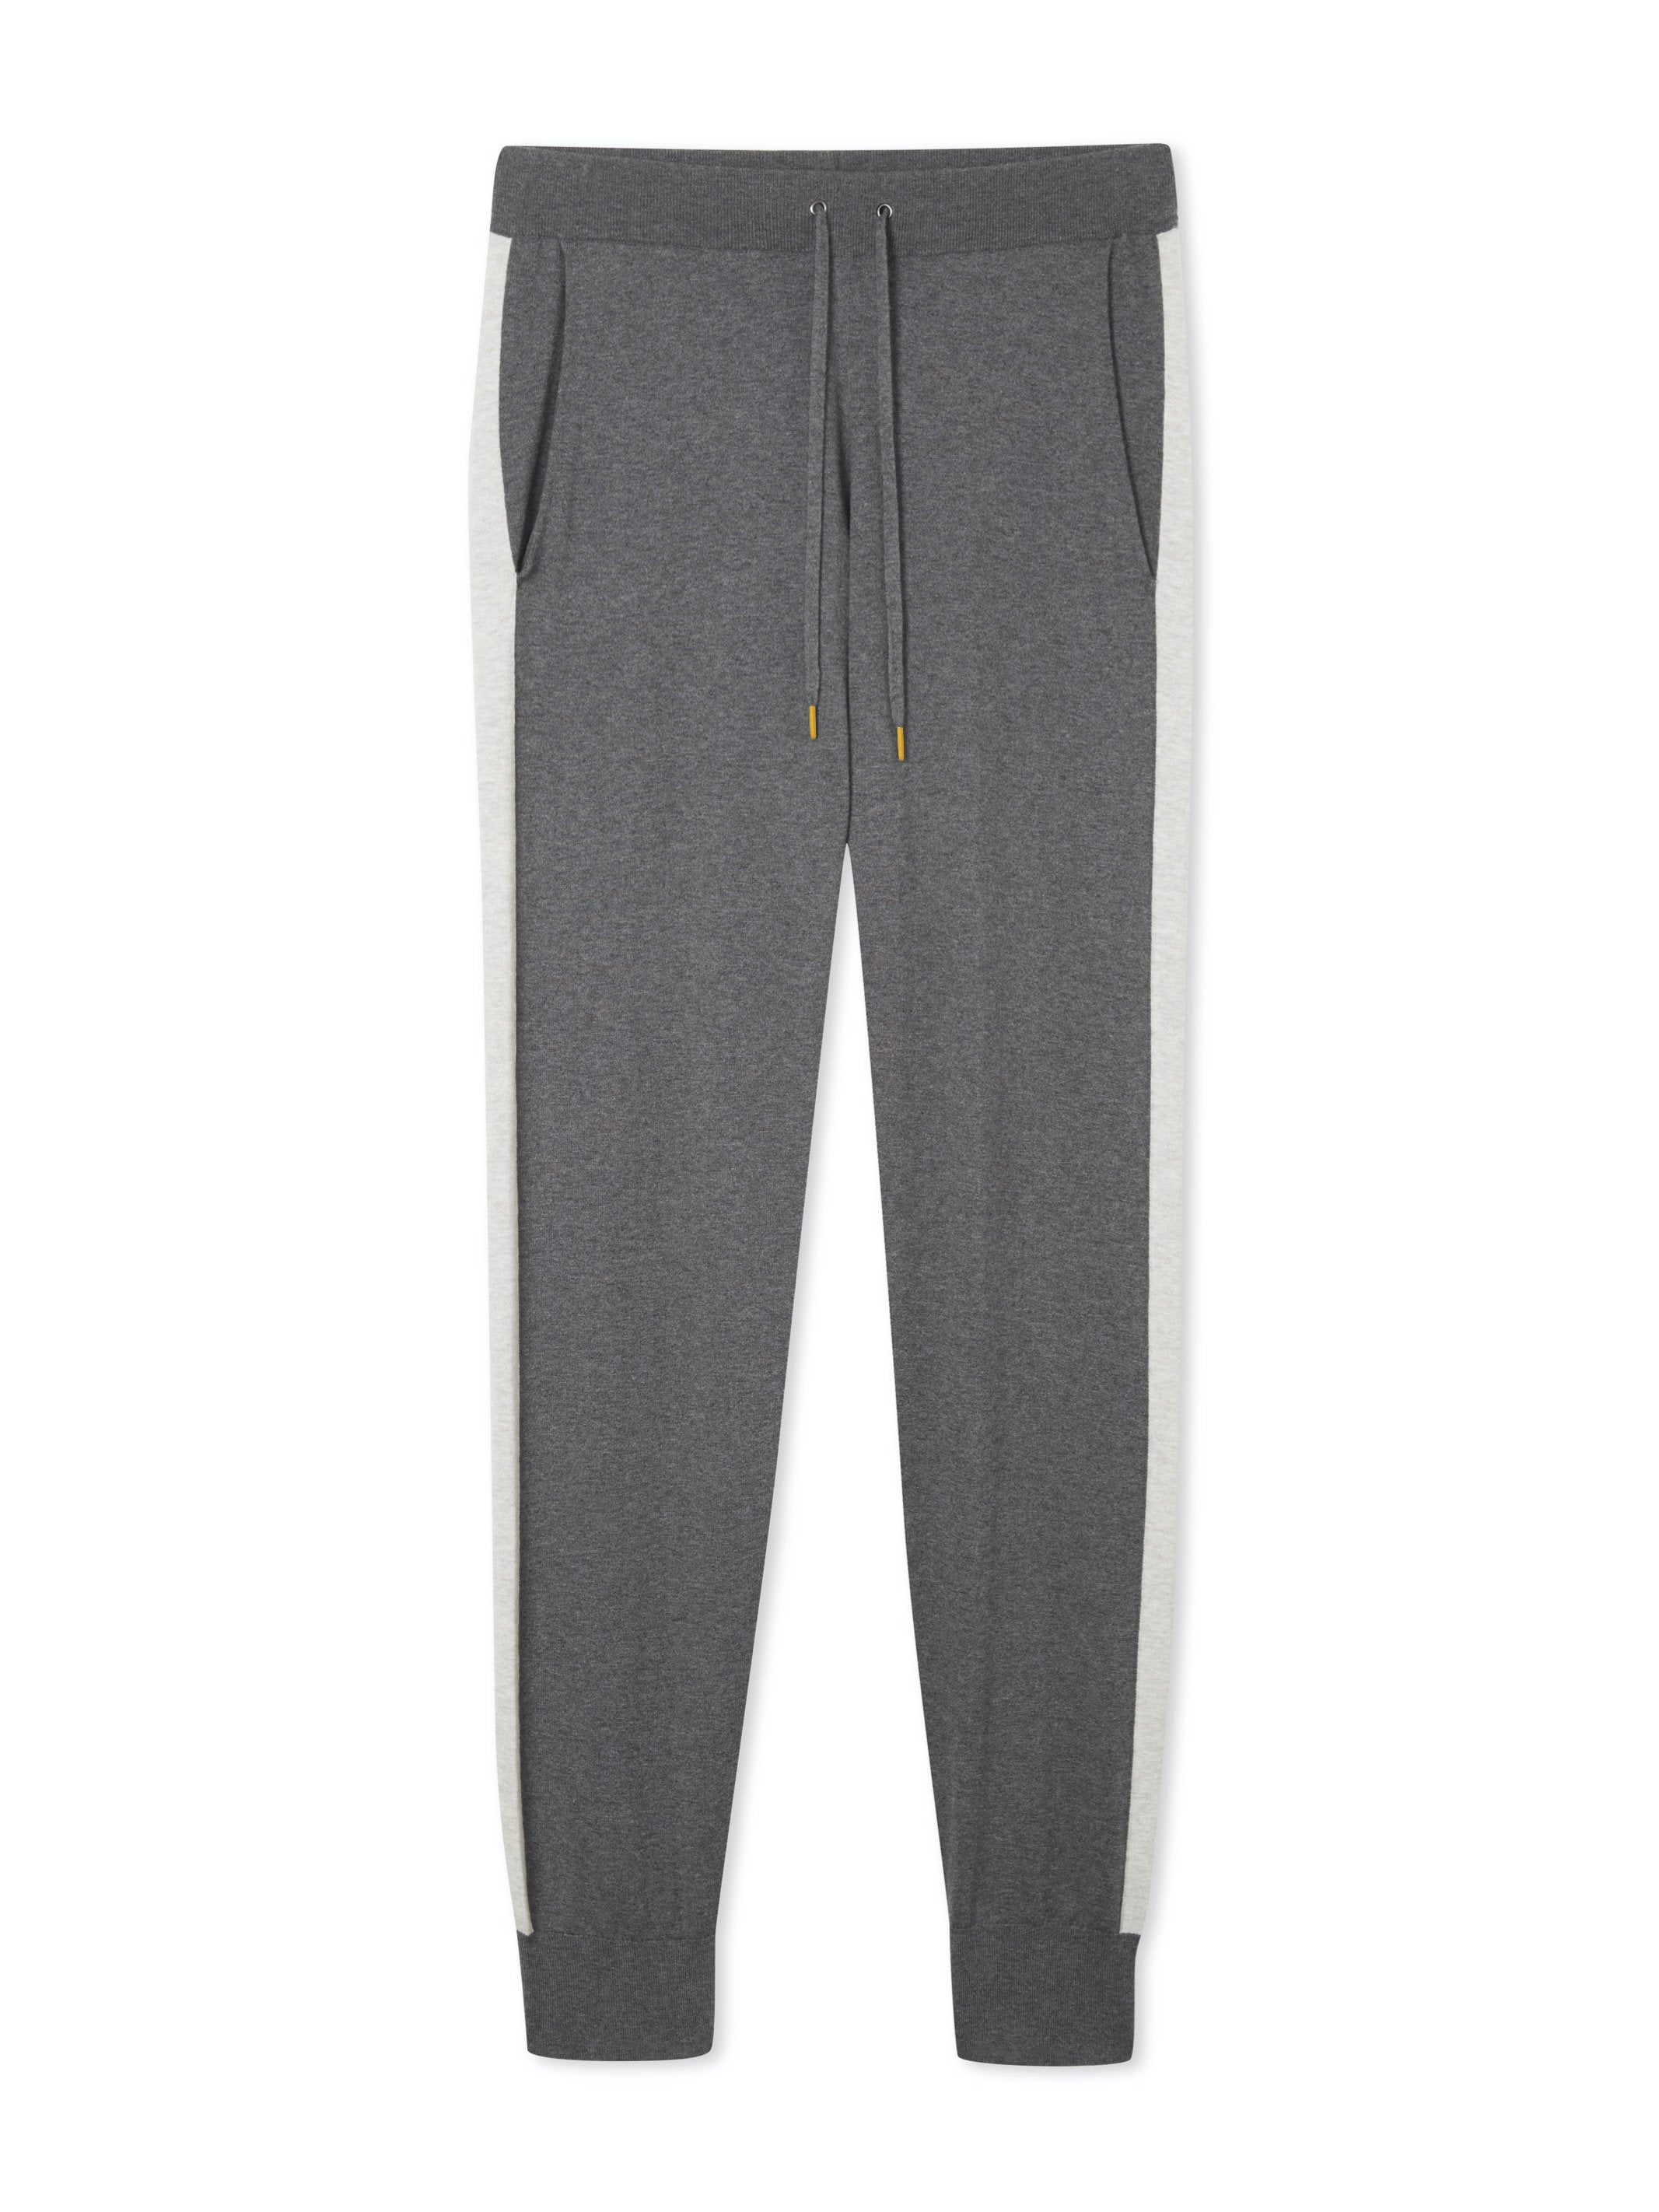 Cashmere & Cotton Knitted Lounge Pant - Charcoal Grey